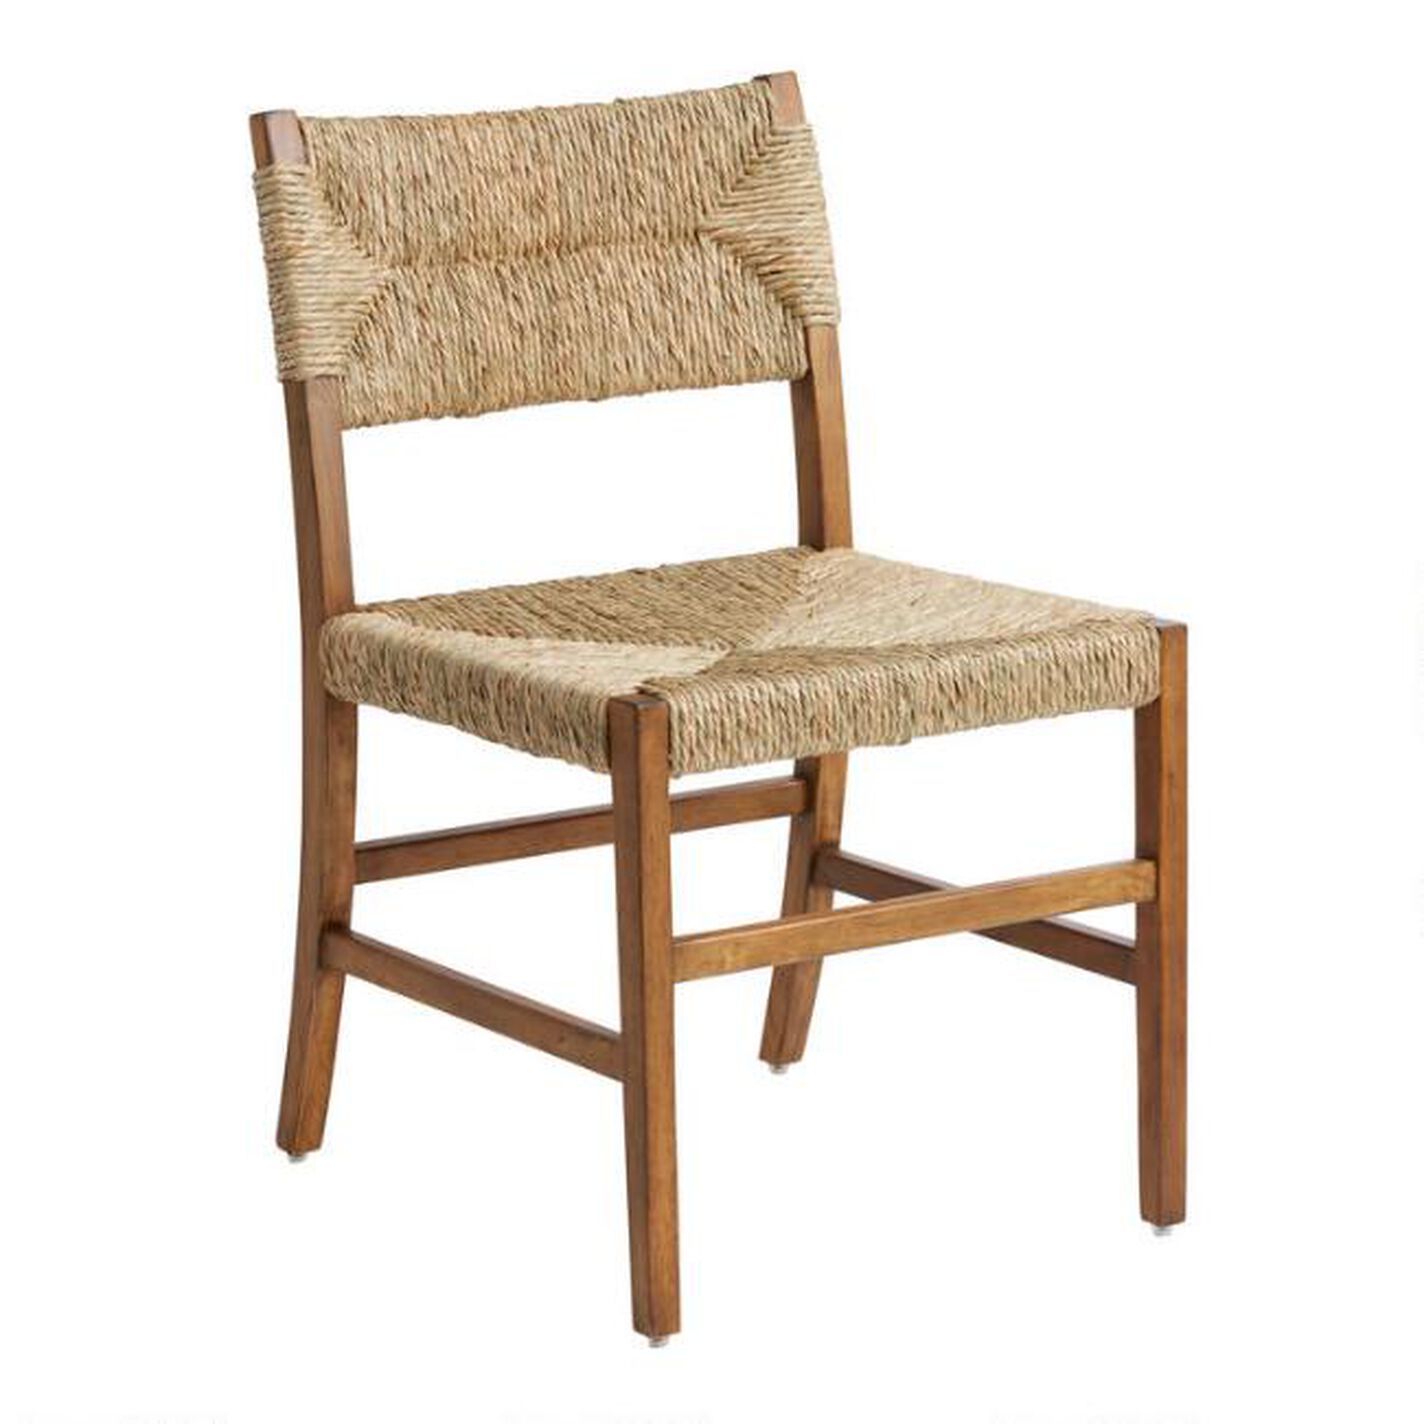 Candace Vintage Acorn and Seagrass Dining Chair Collection | World Market